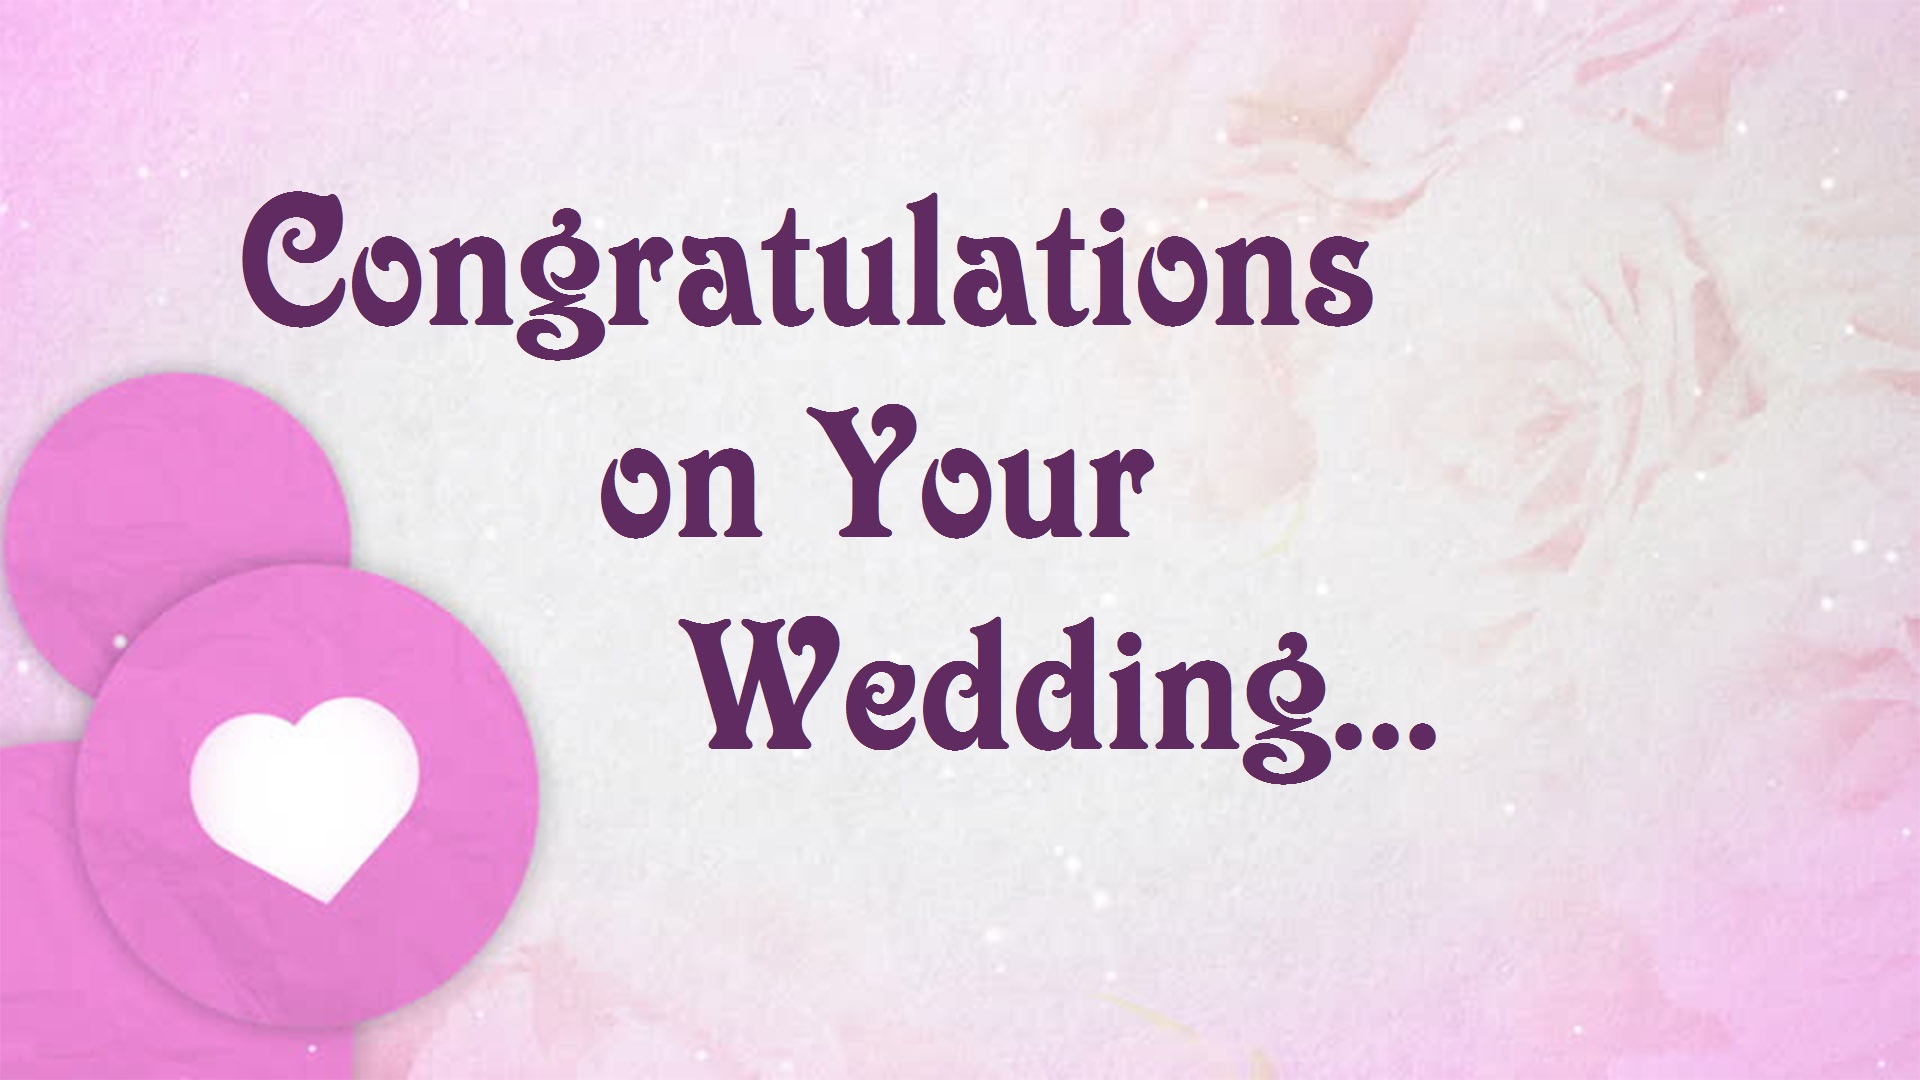 wedding-congratulations-images-hd-pictures-wedding-greeting-cards